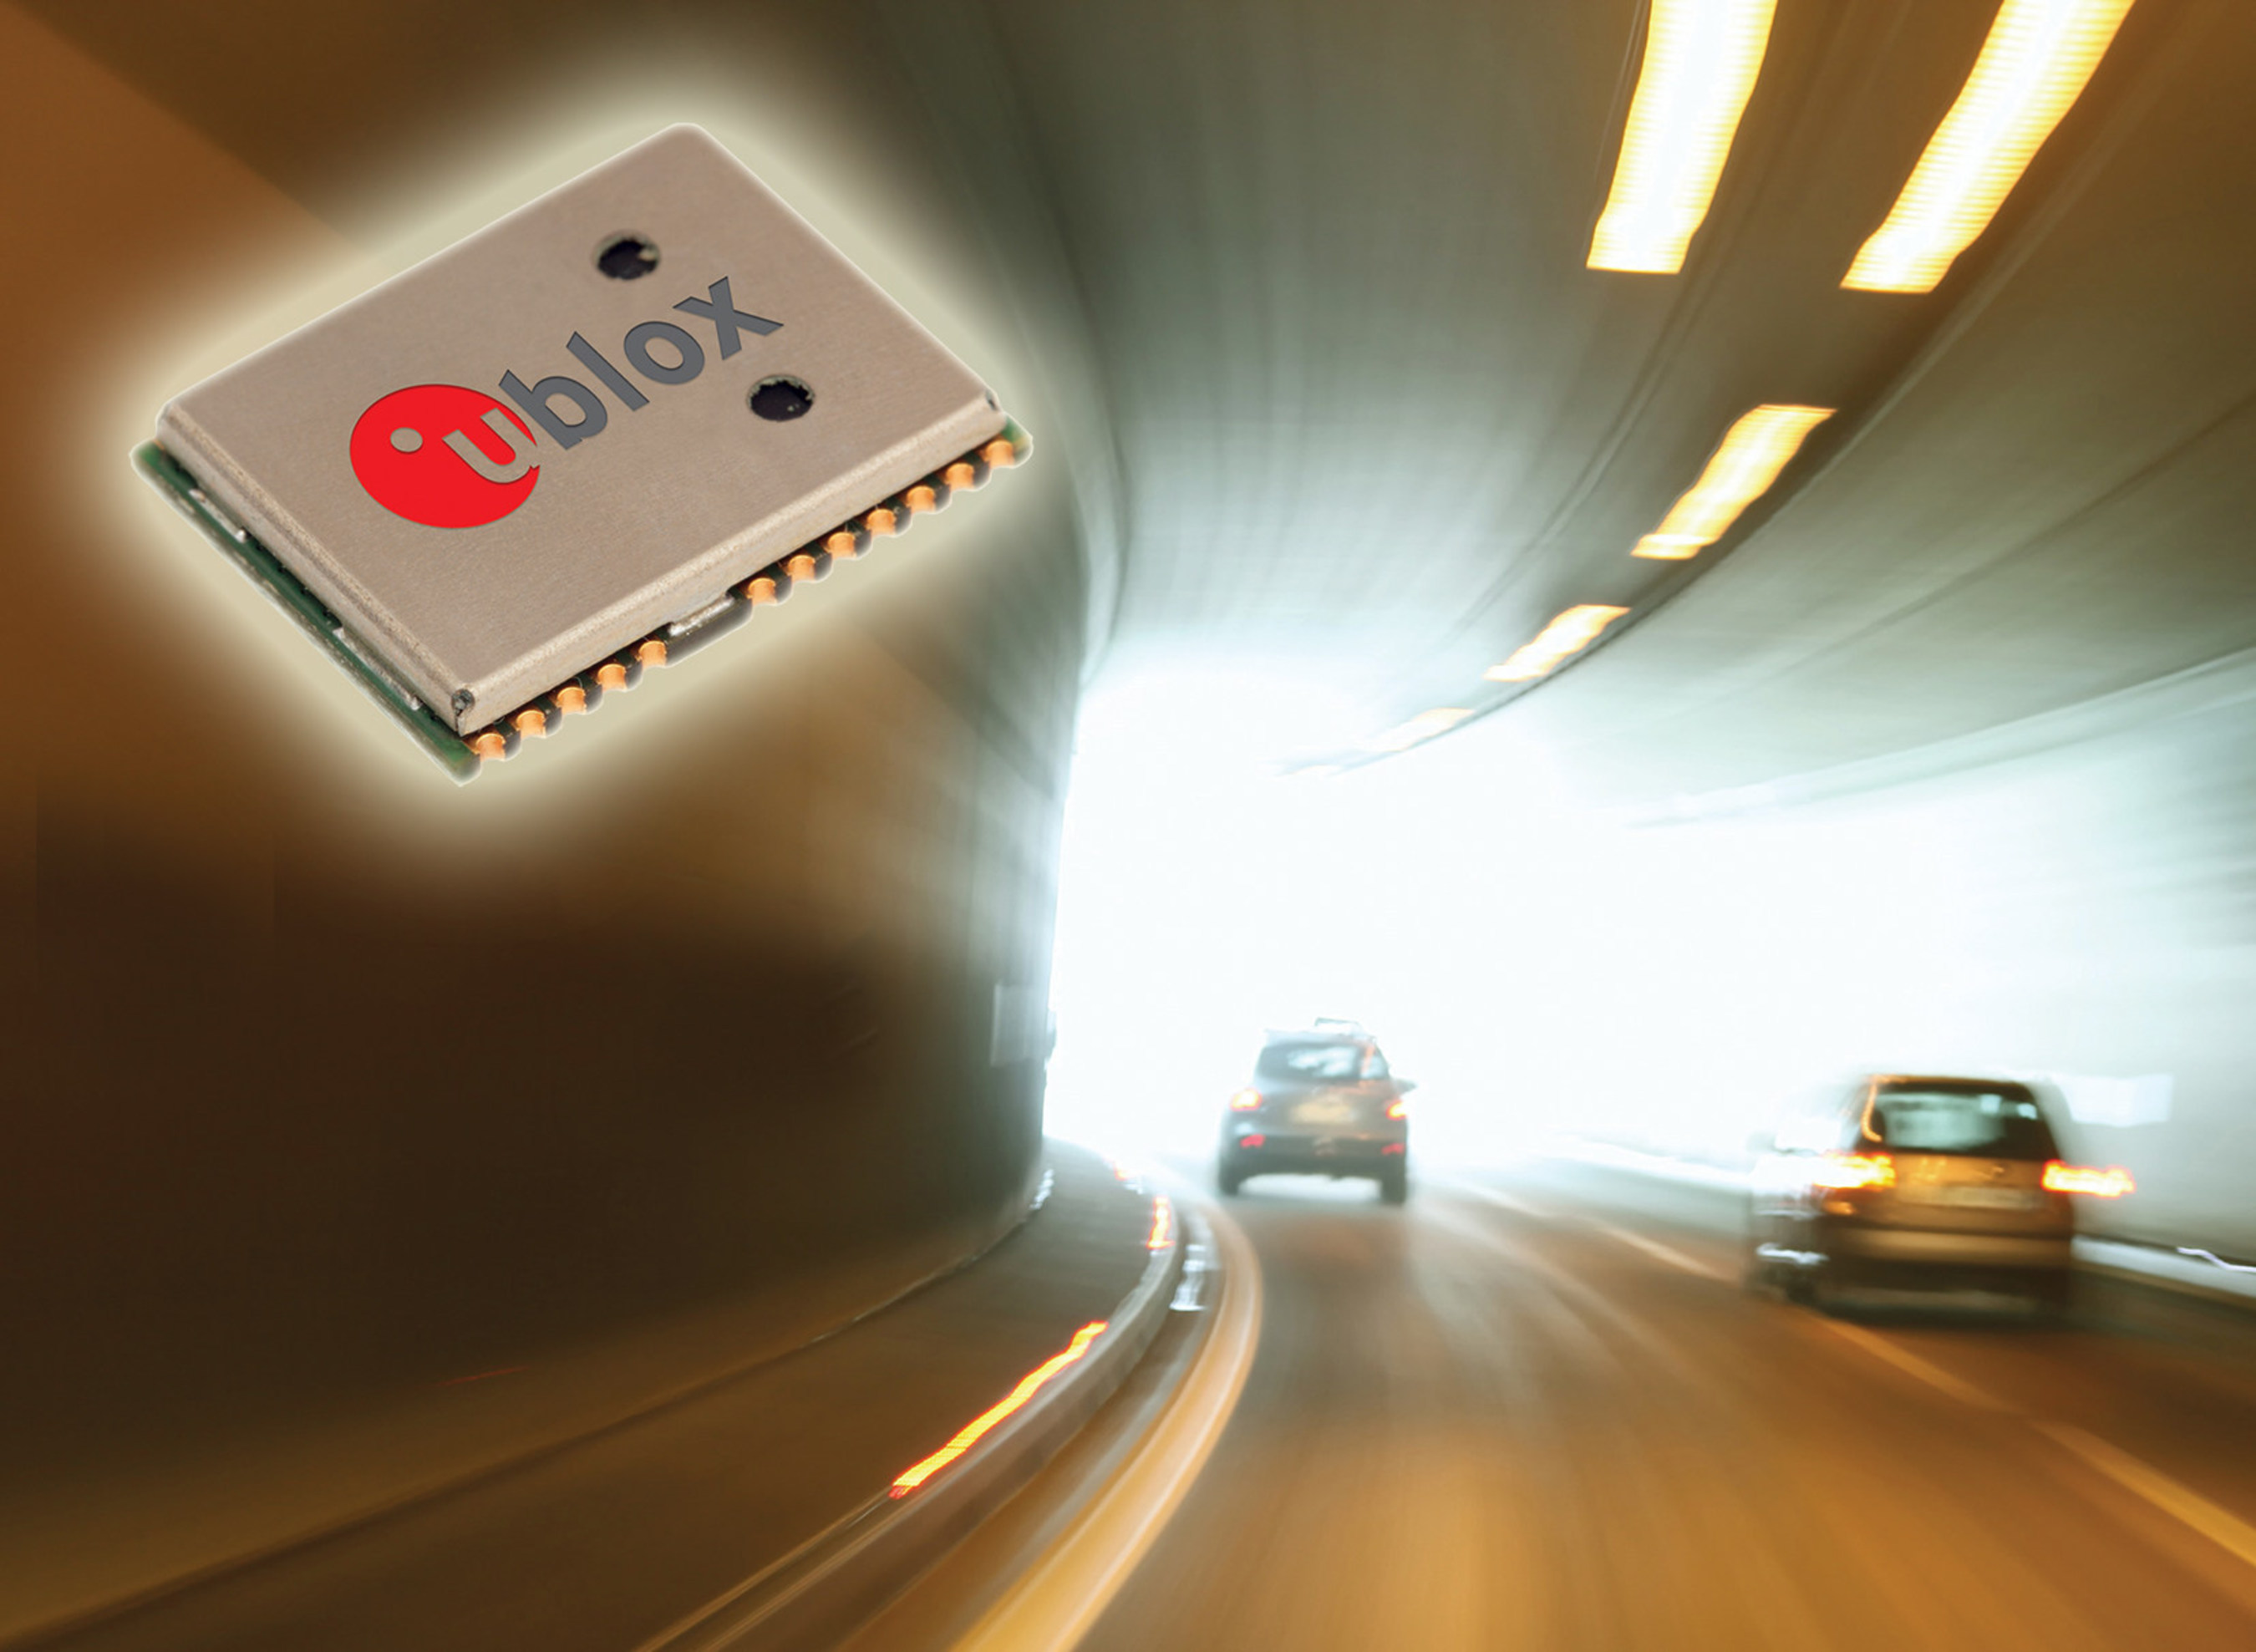 u-blox' NEO-M8L module with 3D Automotive Dead Reckoning technology and integrated sensors help ensure vehicle position is always accurate regardless of satellite visibility.